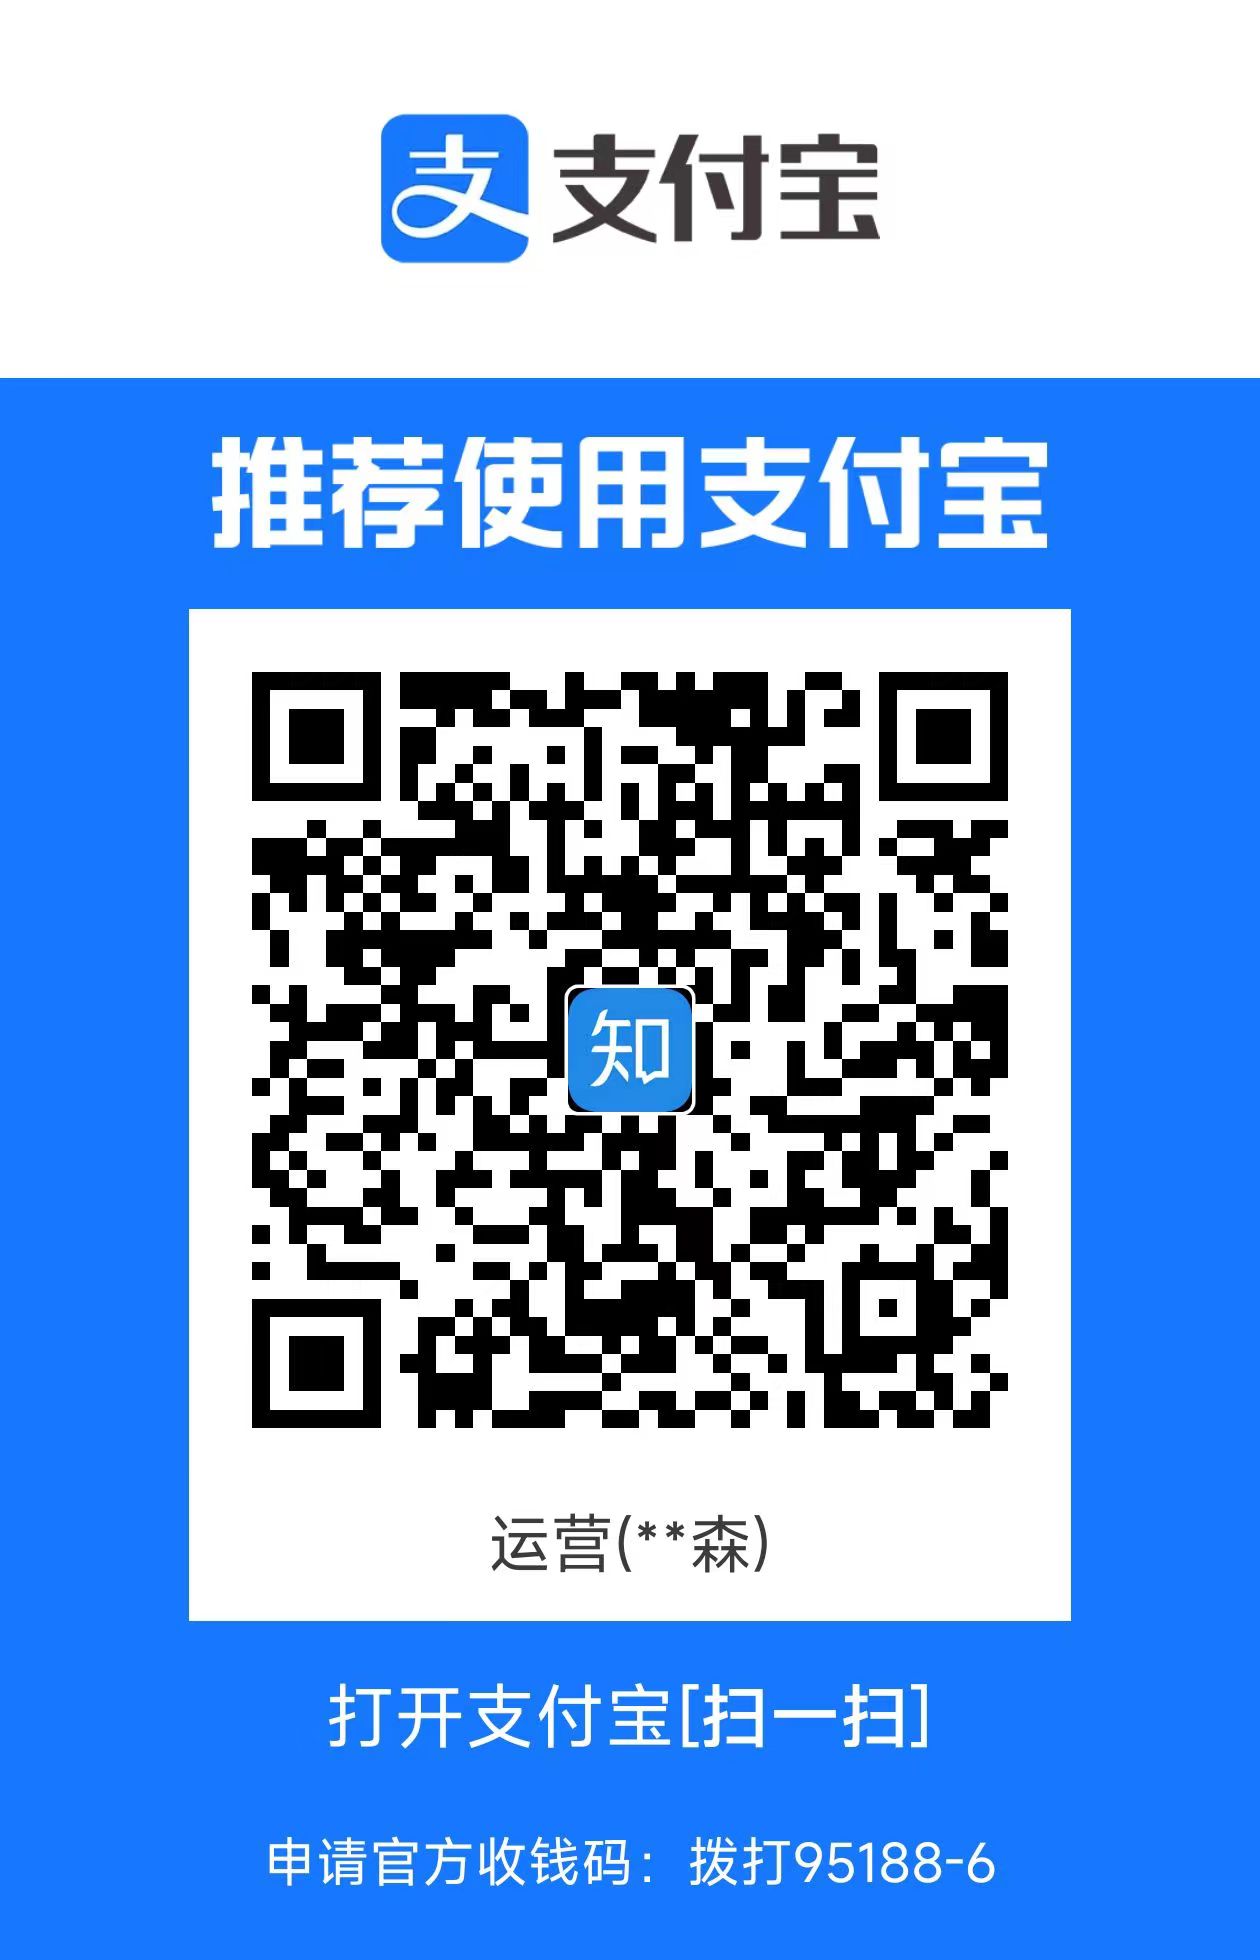 Alipay Collection